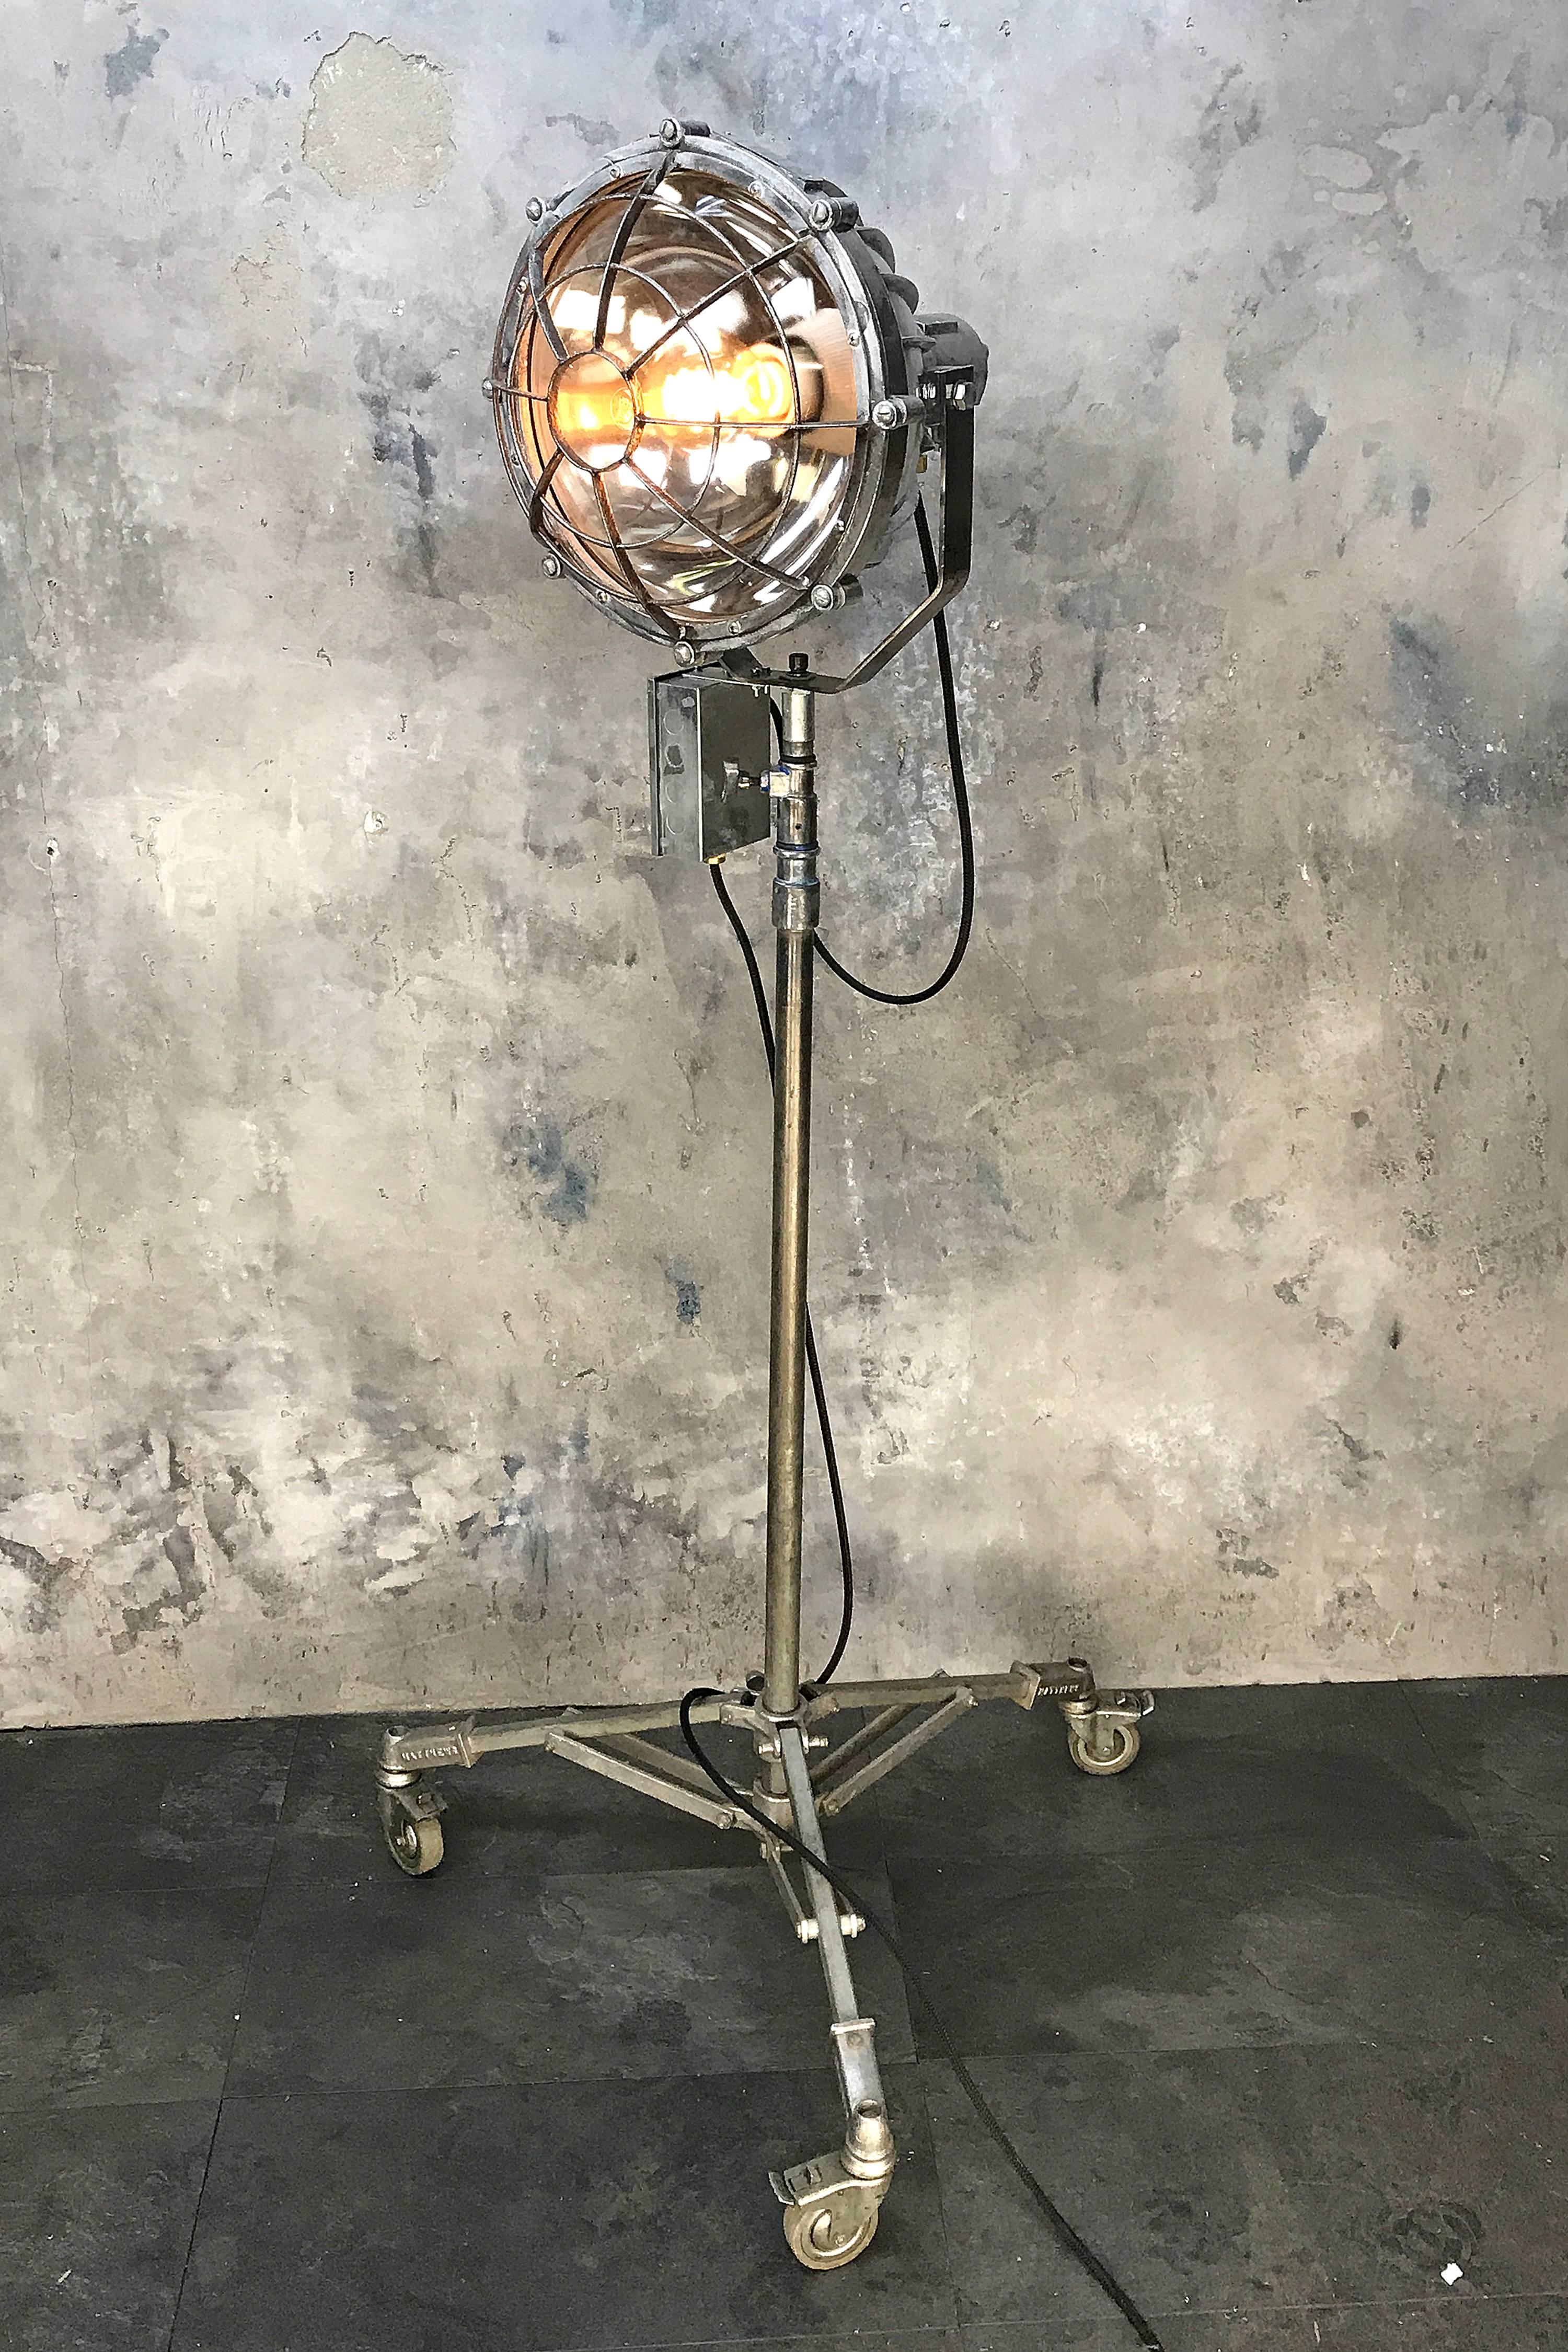 Reclaimed Japanese explosion proof spot light and Matthews theatre tripod. 

The lamp is aluminium cast with fins for cooling with convex glass, which creates a wider beam and is protected by a bulls eye style cage which is made from steel